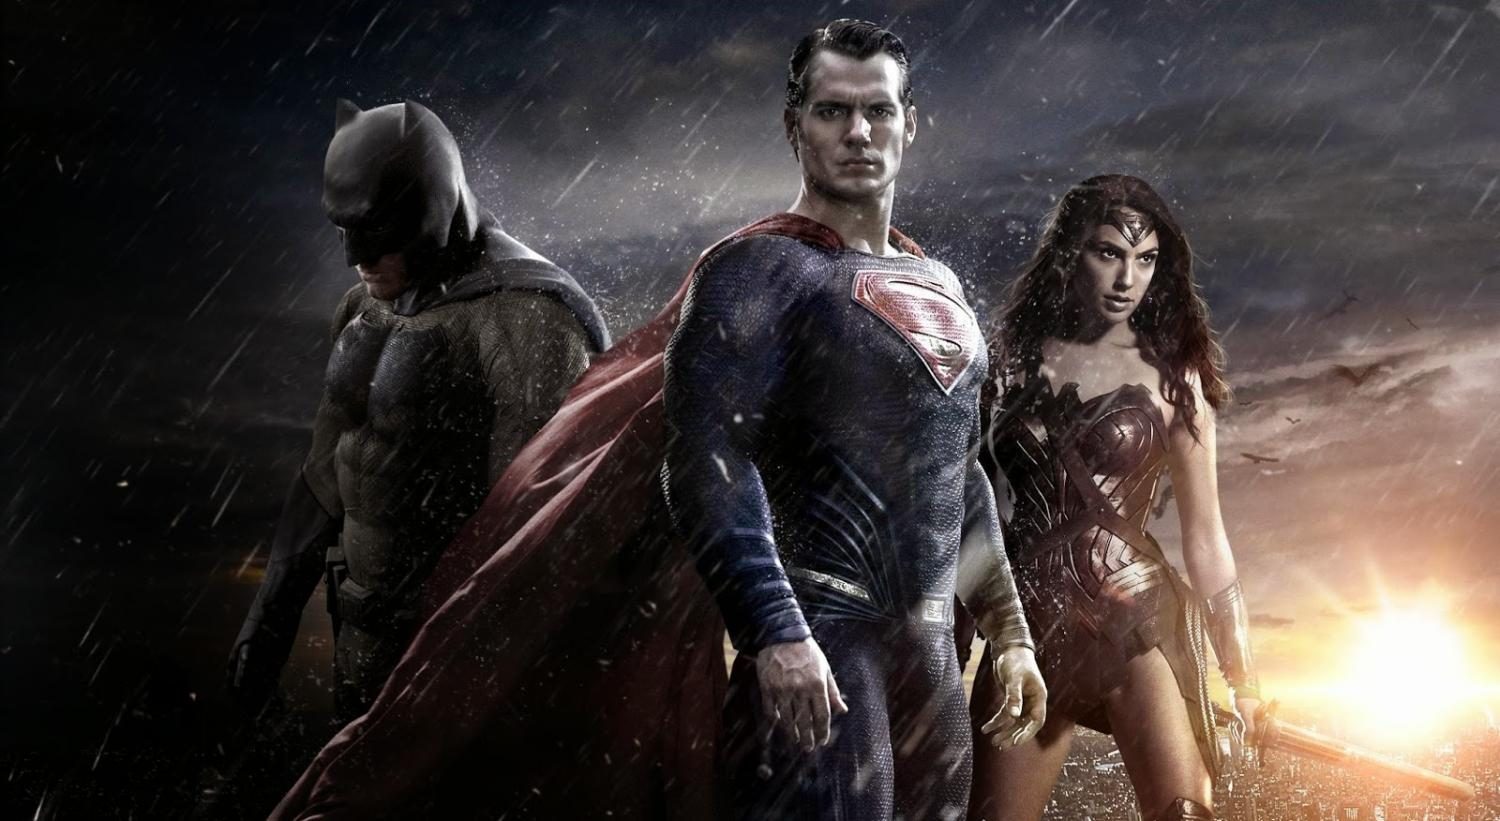 Batman (left), Superman (middle), and Wonder Woman (right), are the three most iconic heroes of DC Comics. All three are set to appear in Justice League, which releases Nov. 17.